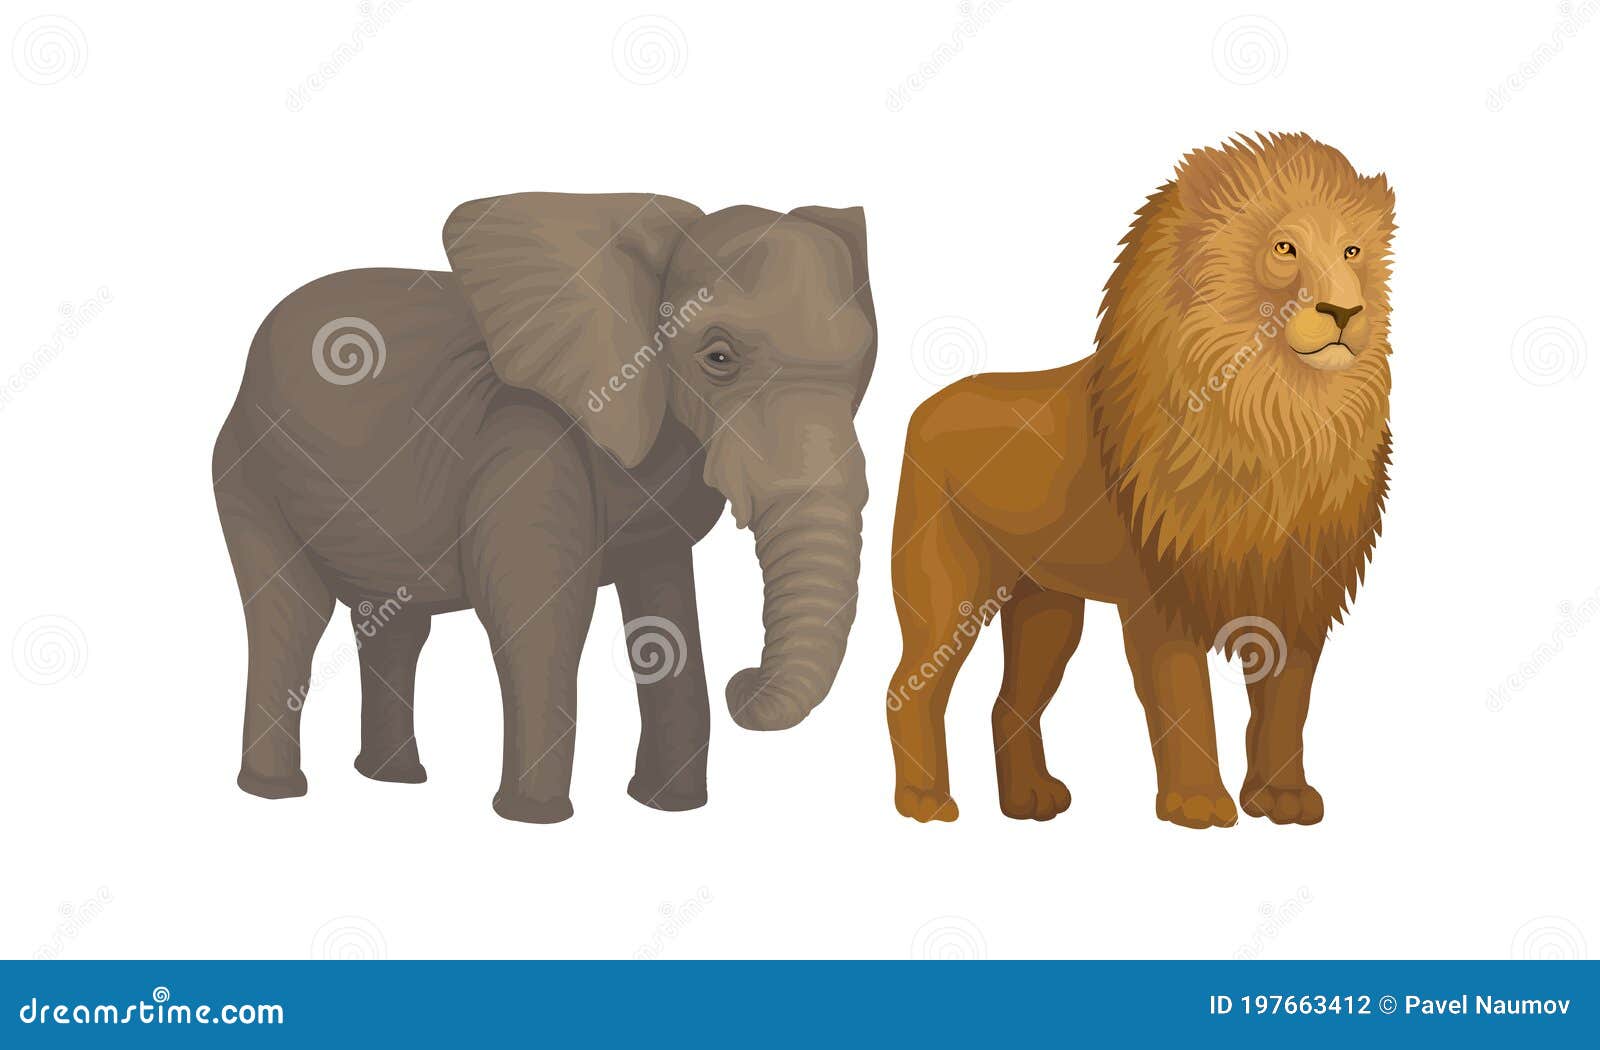 Elephant with Long Trunk and Lion with Mane As African Animal Vector Set  Stock Vector - Illustration of outdoor, graphic: 197663412